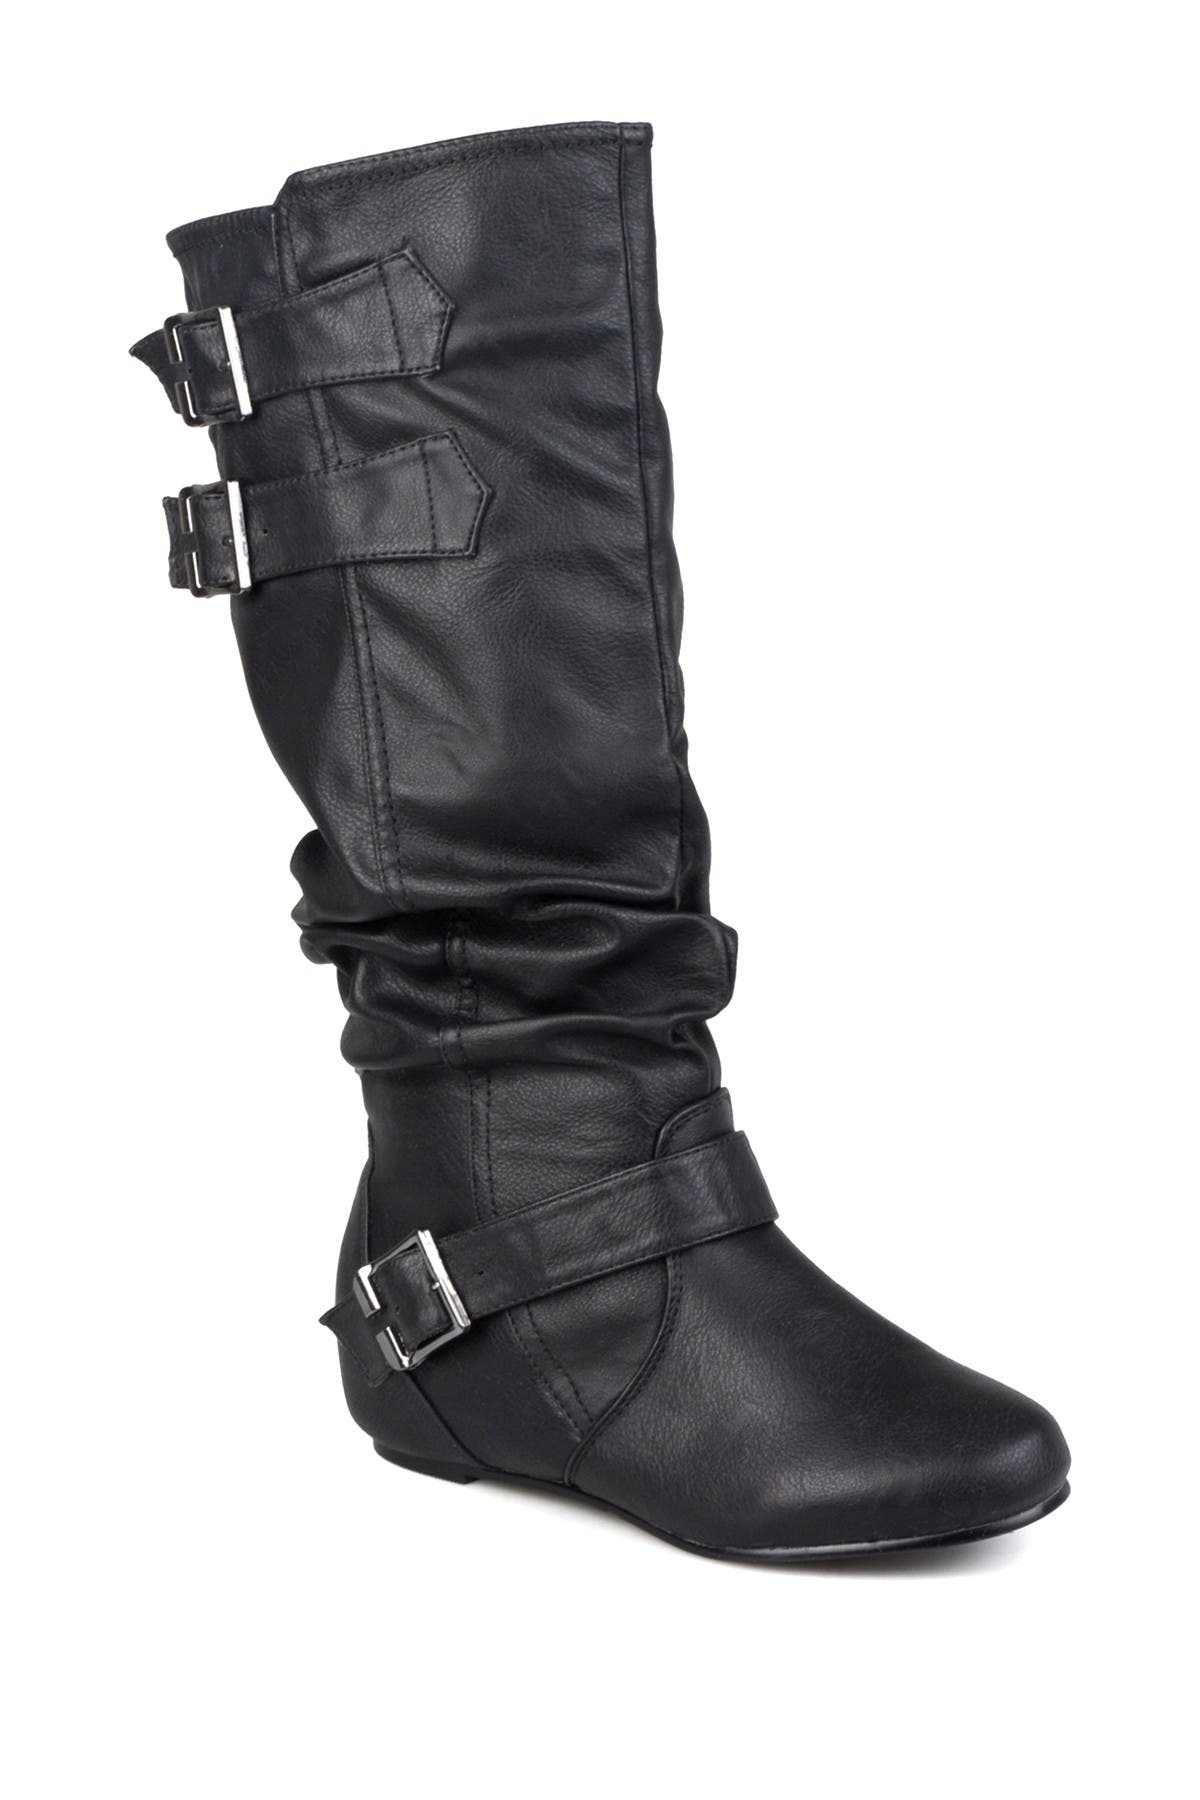 journee riding boots